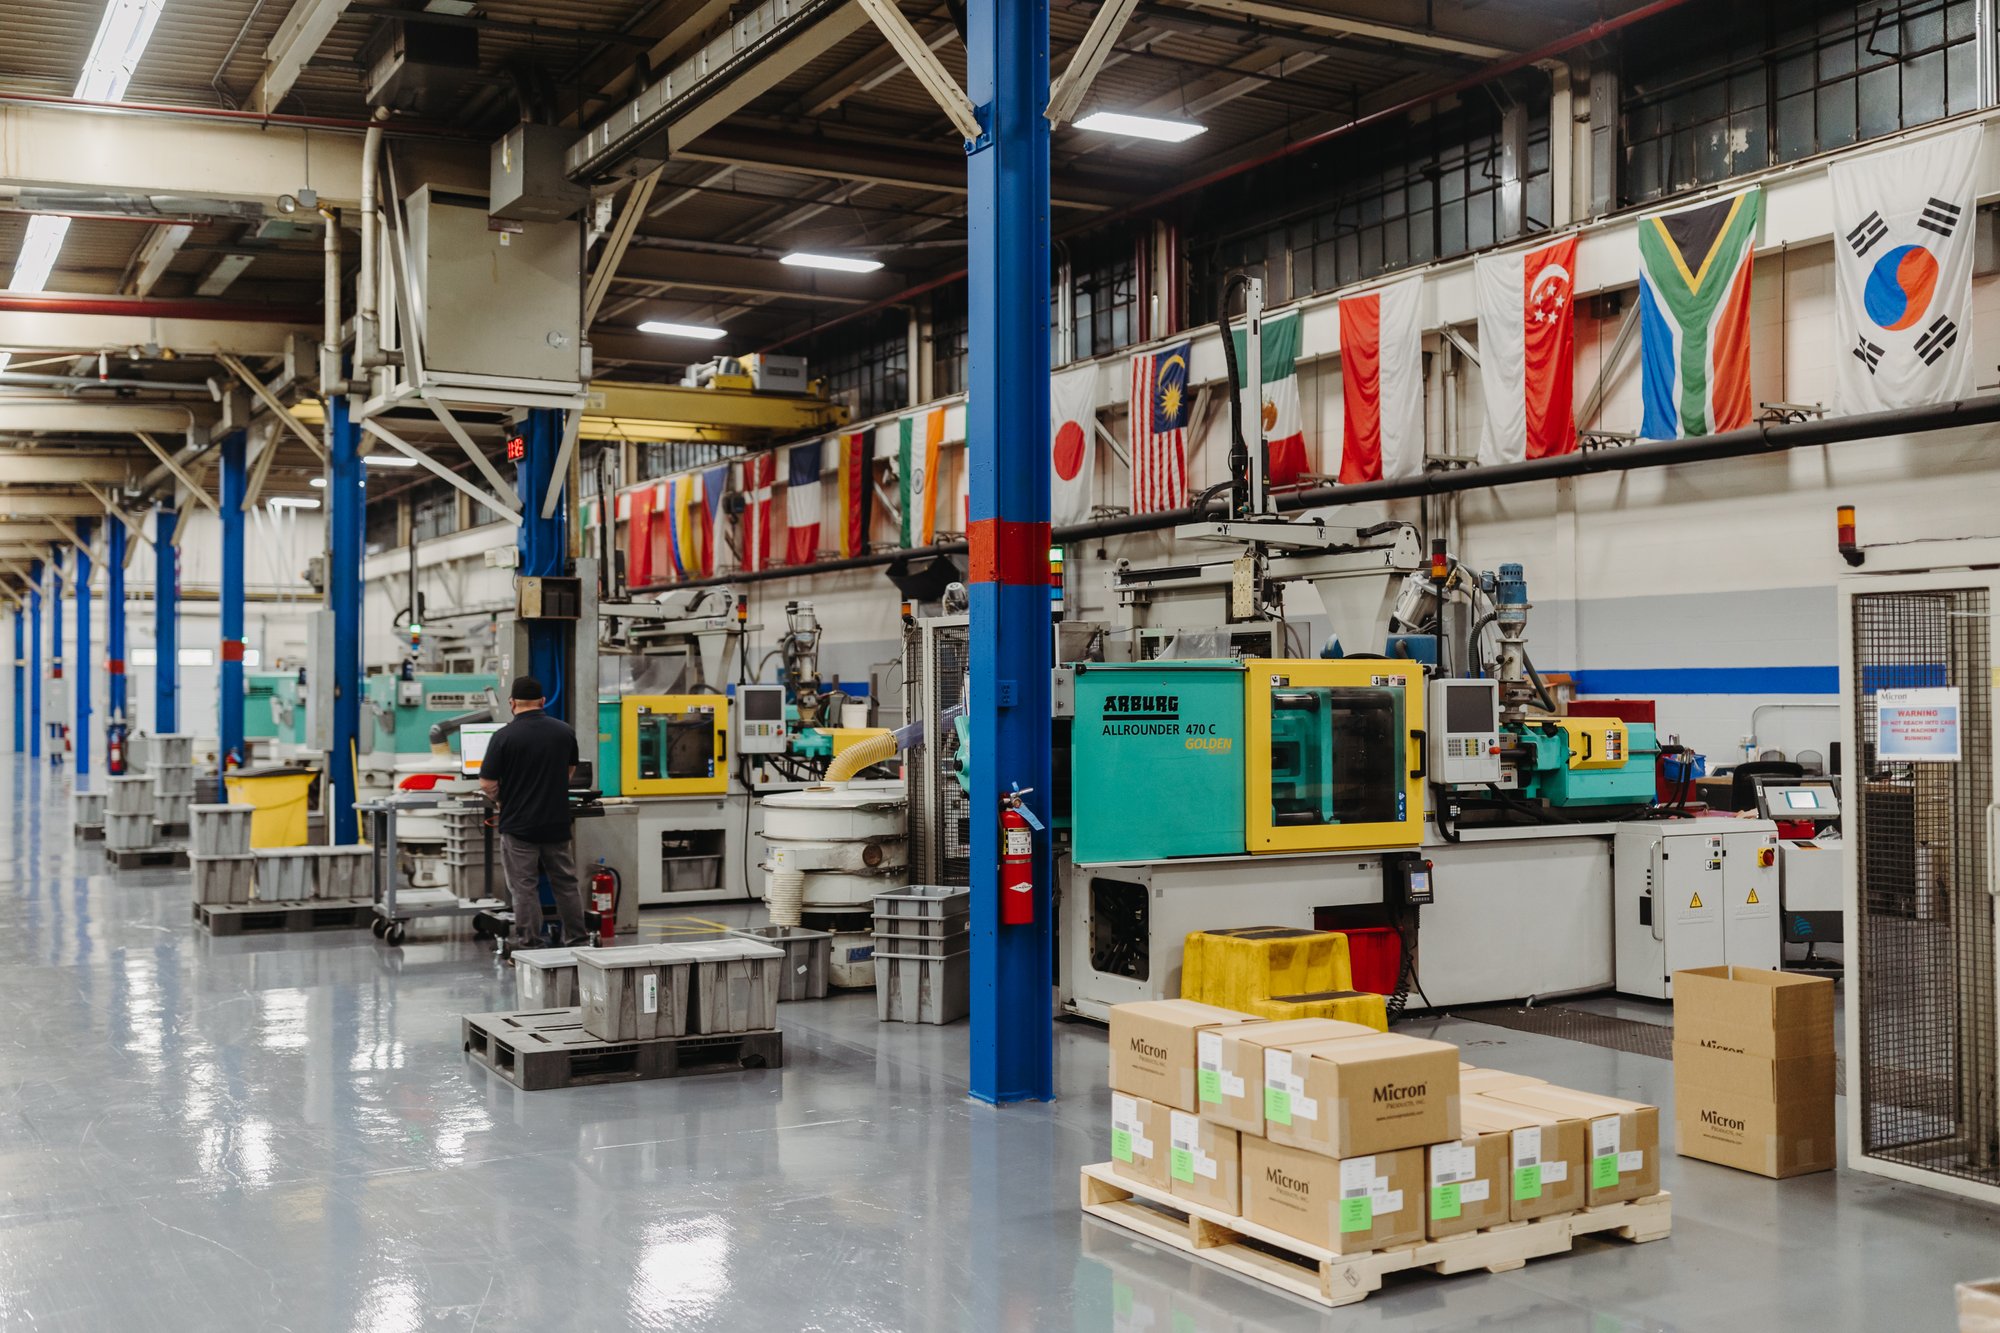 Micron Solutions Arburg Machines on the Manufacturing Floor